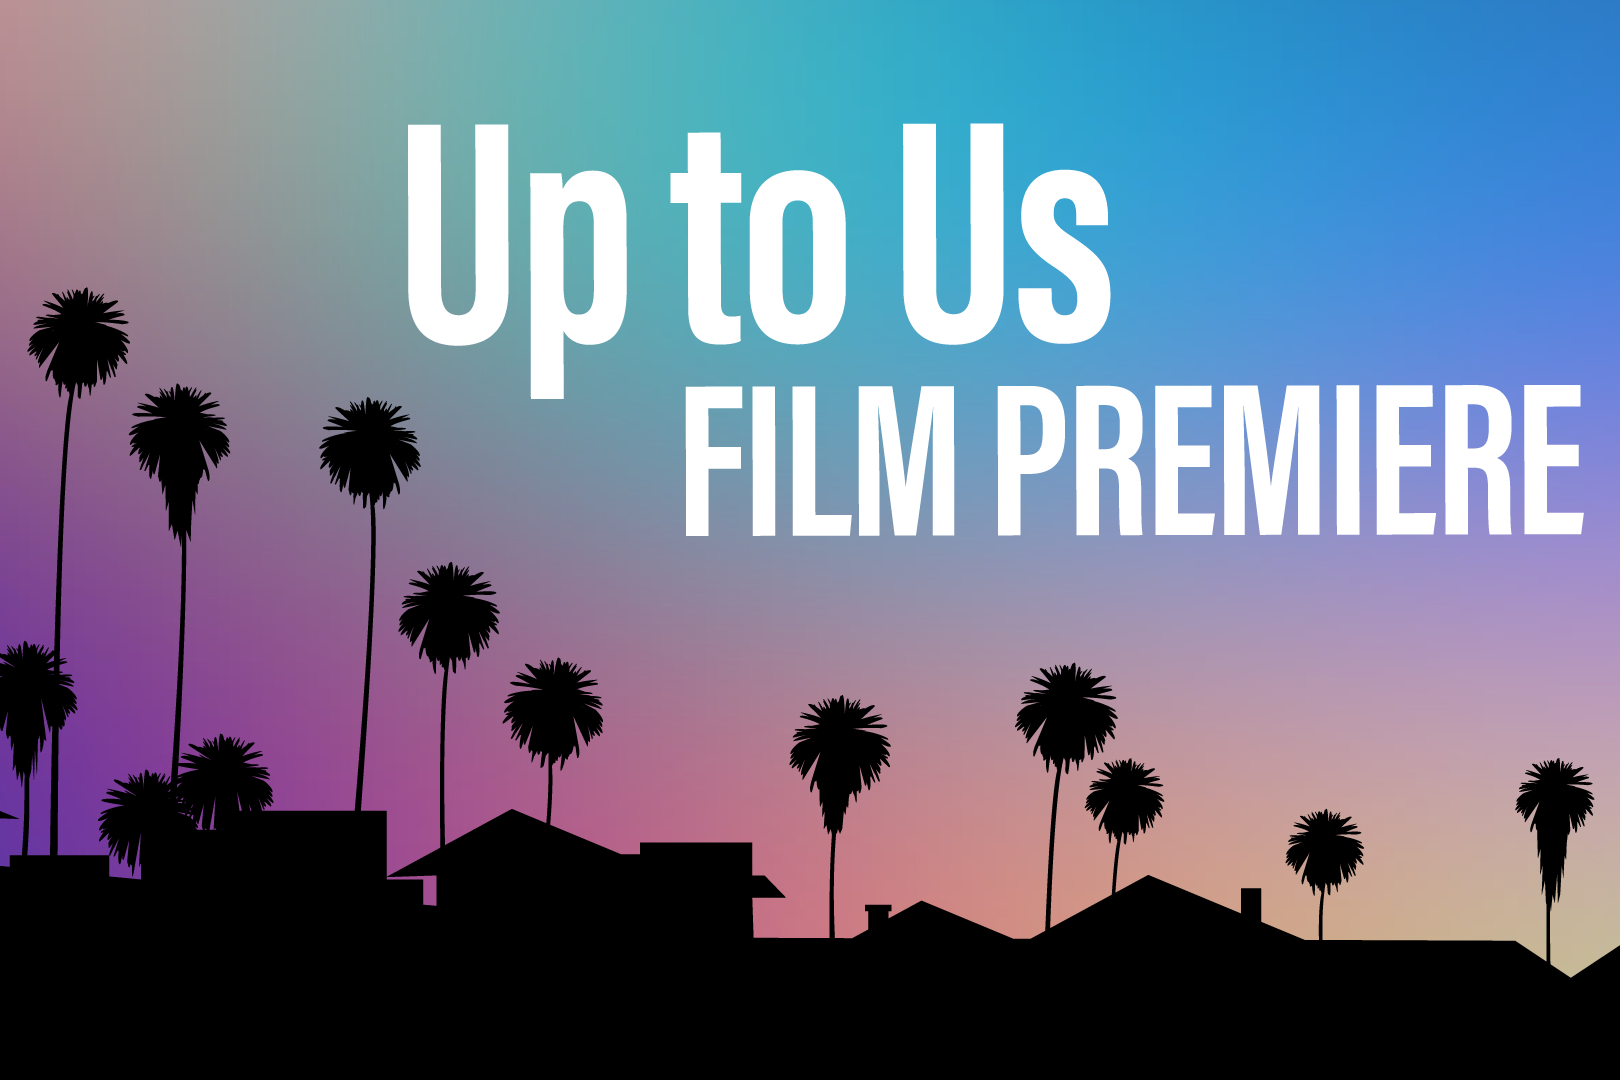 Up to Us Film Premiere